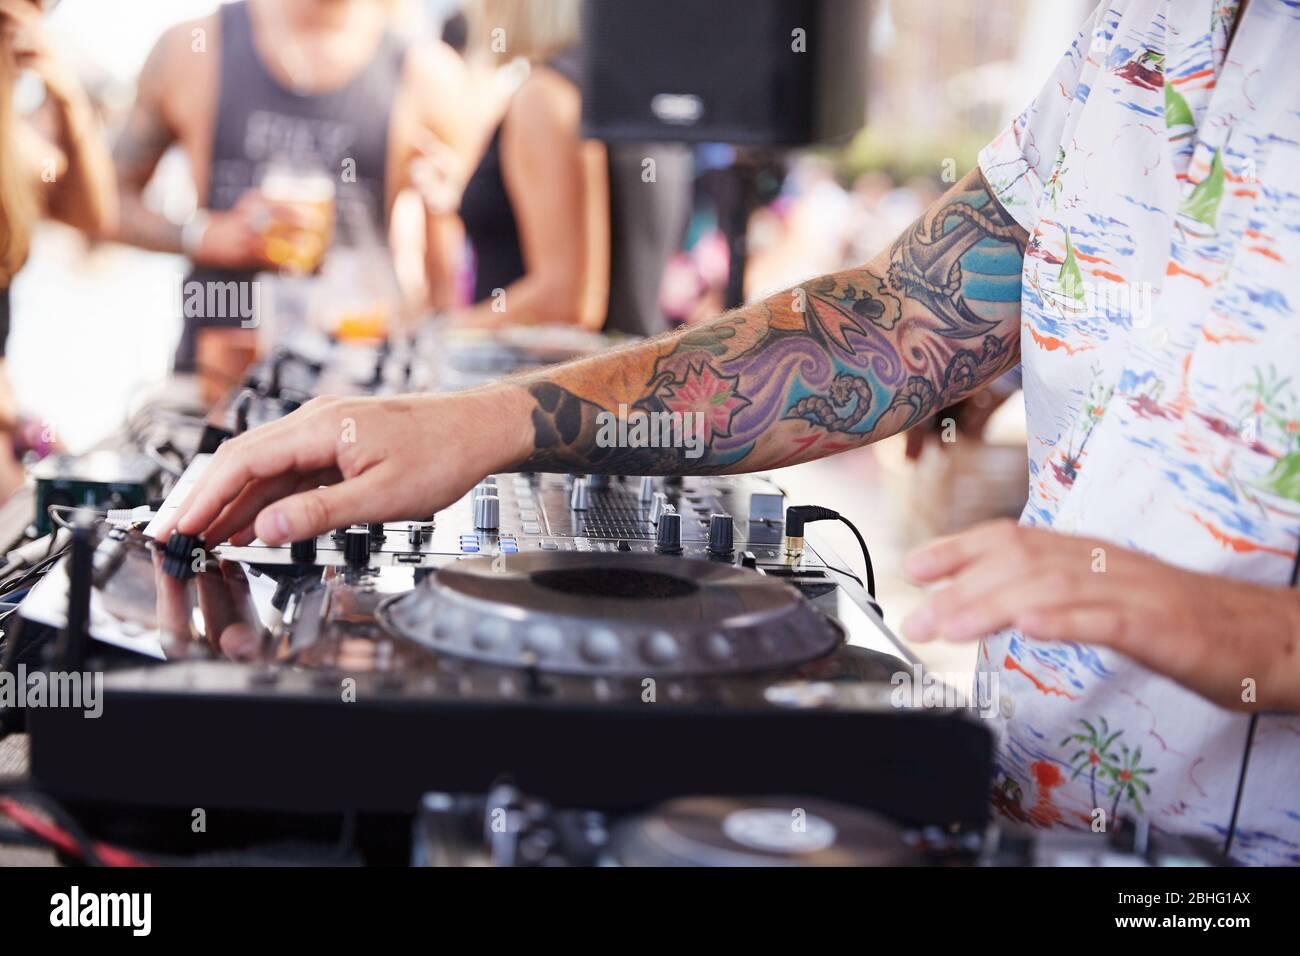 Dj Tattoo Designs Photos and Premium High Res Pictures - Getty Images